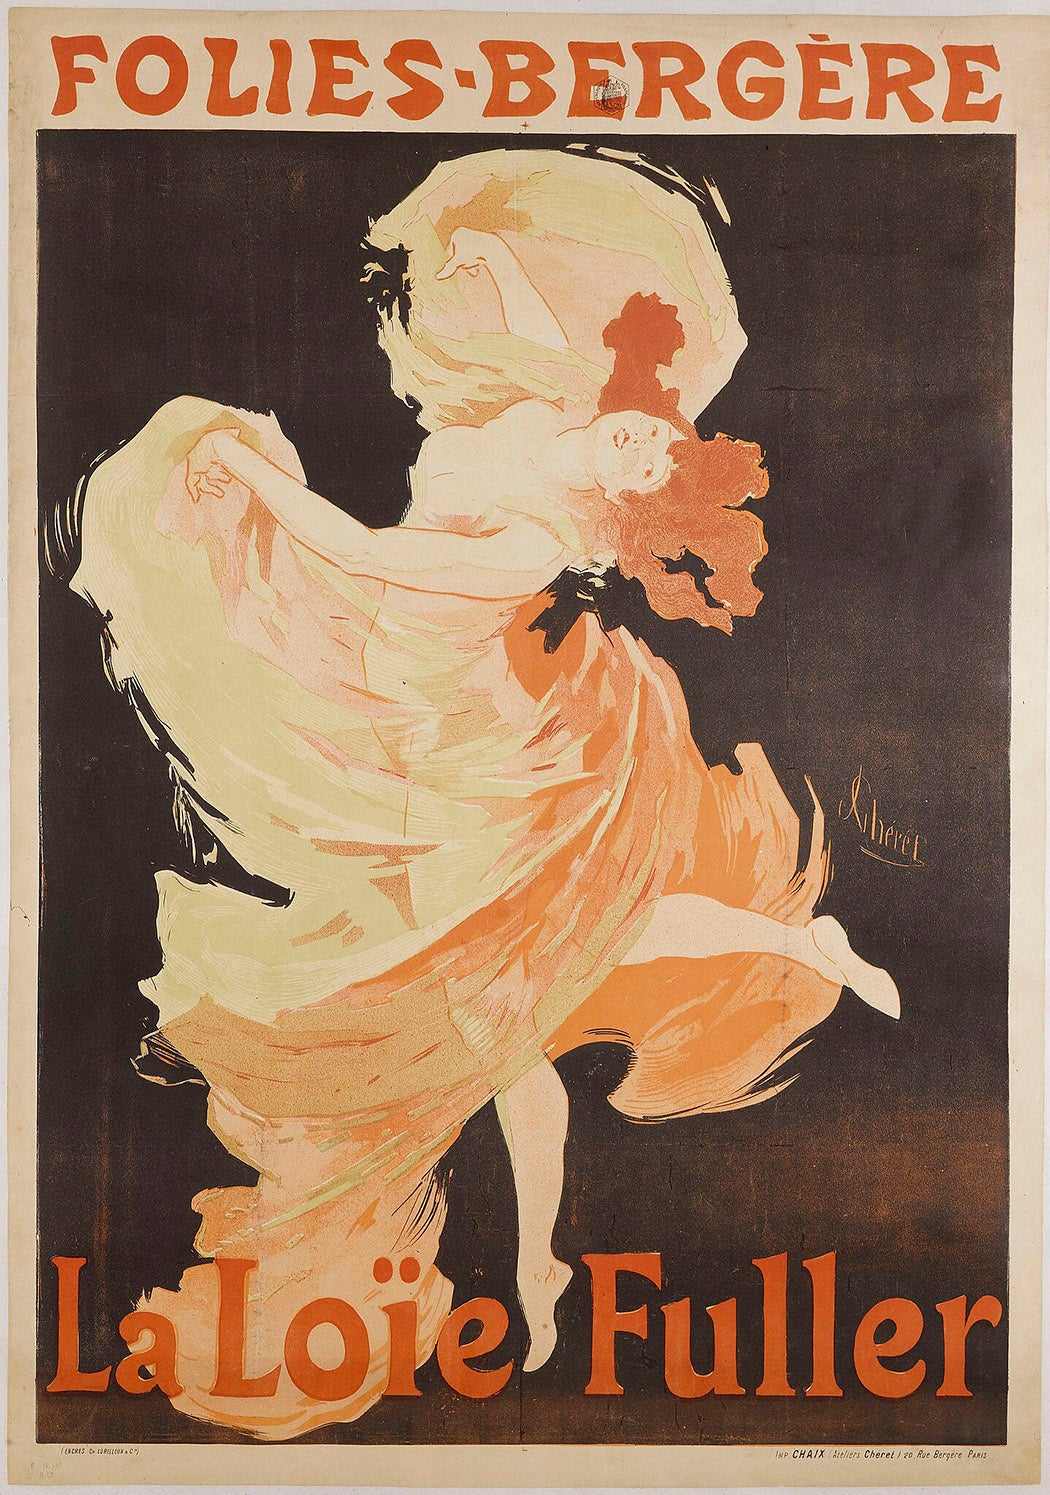 A poster by Jules Chéret advertising a show by Loie Fuller in Paris, 1893. The poster depicts Fuller performing her famous Serpentine Dance